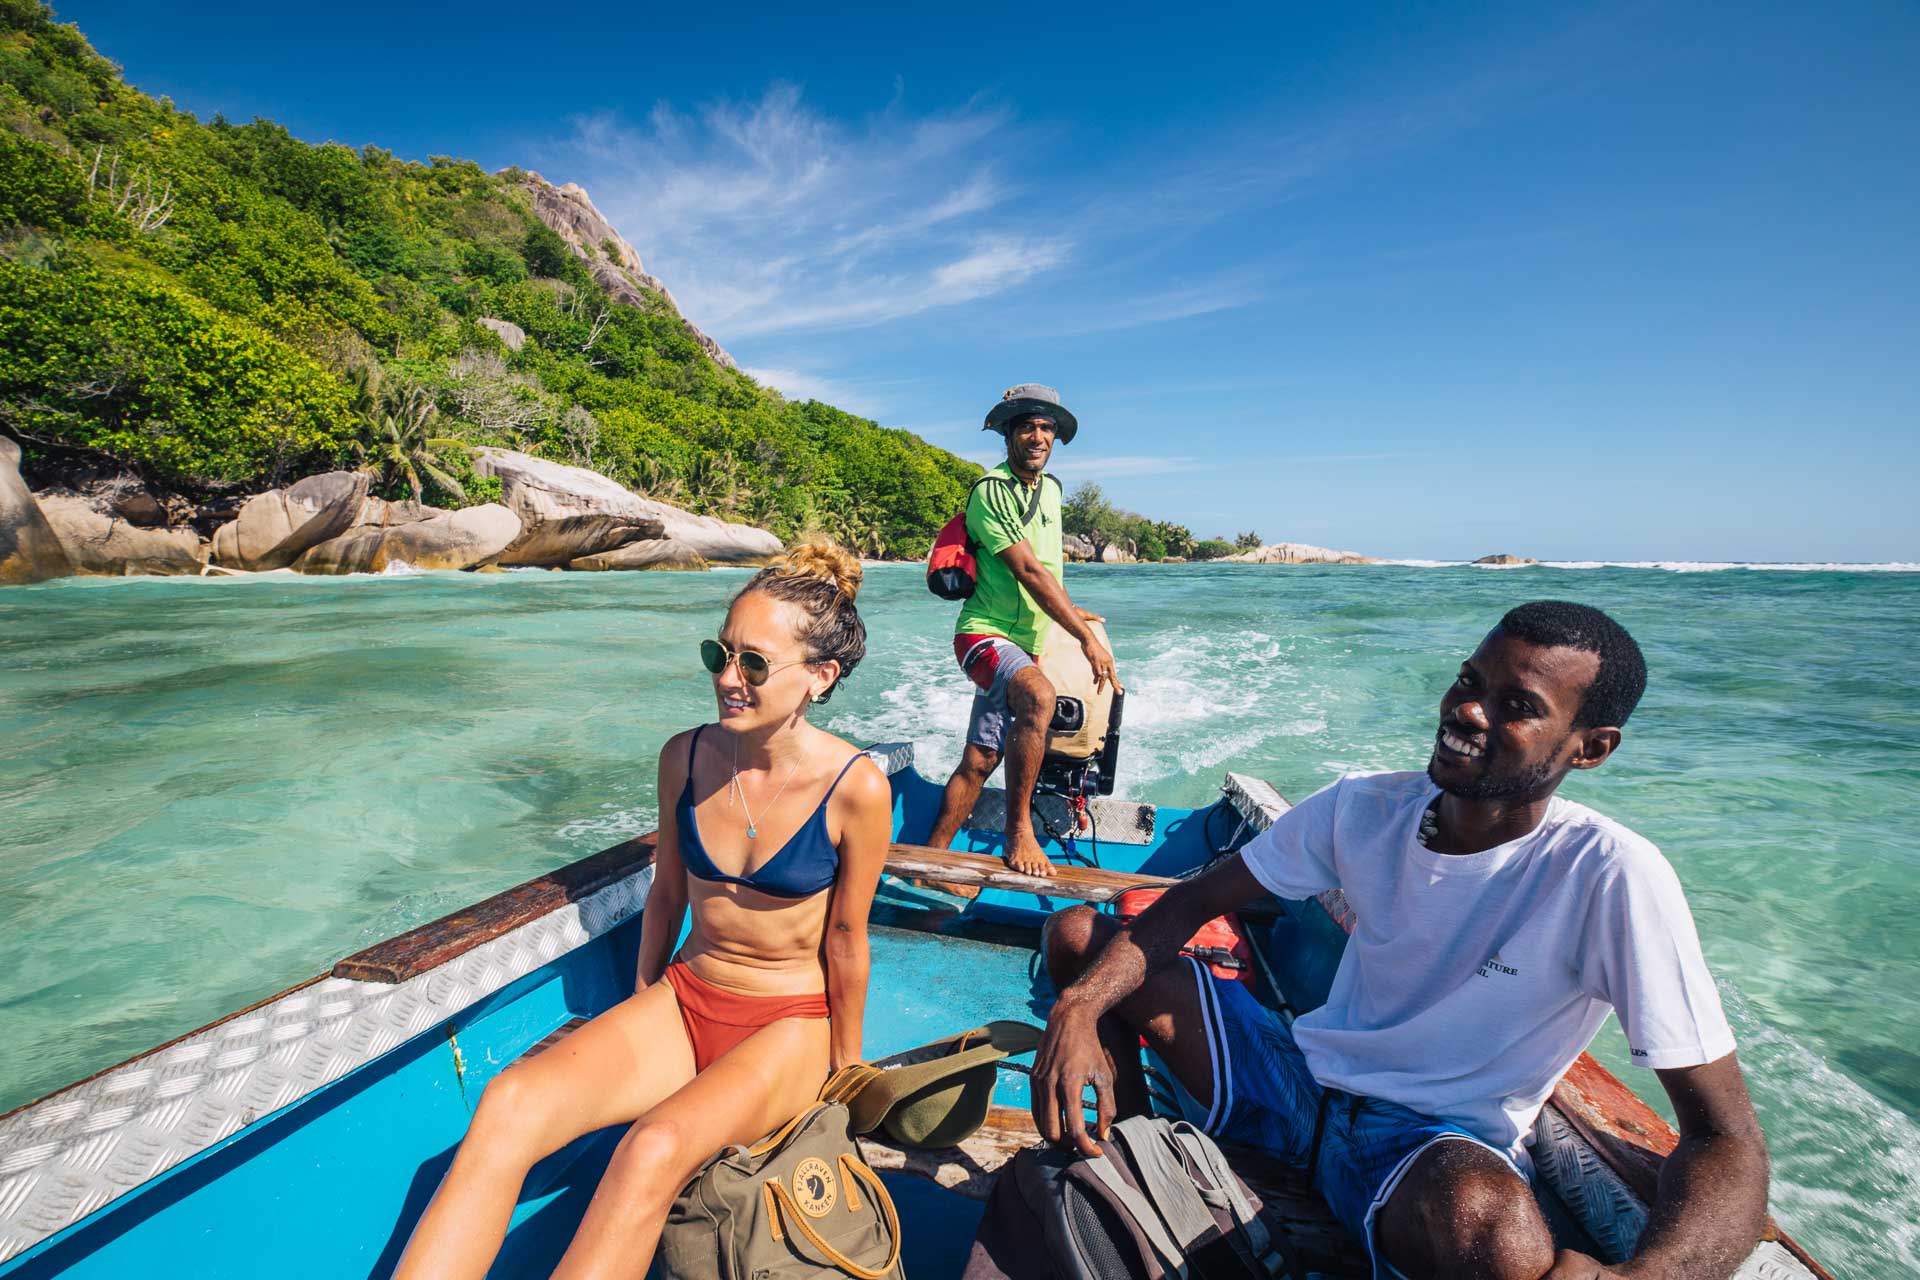 mahe to la digue, how to get to la digue, beaches on la digue, la digue beaches, la digue island, la digue seychelles, things to do in la digue, best beaches in la digue